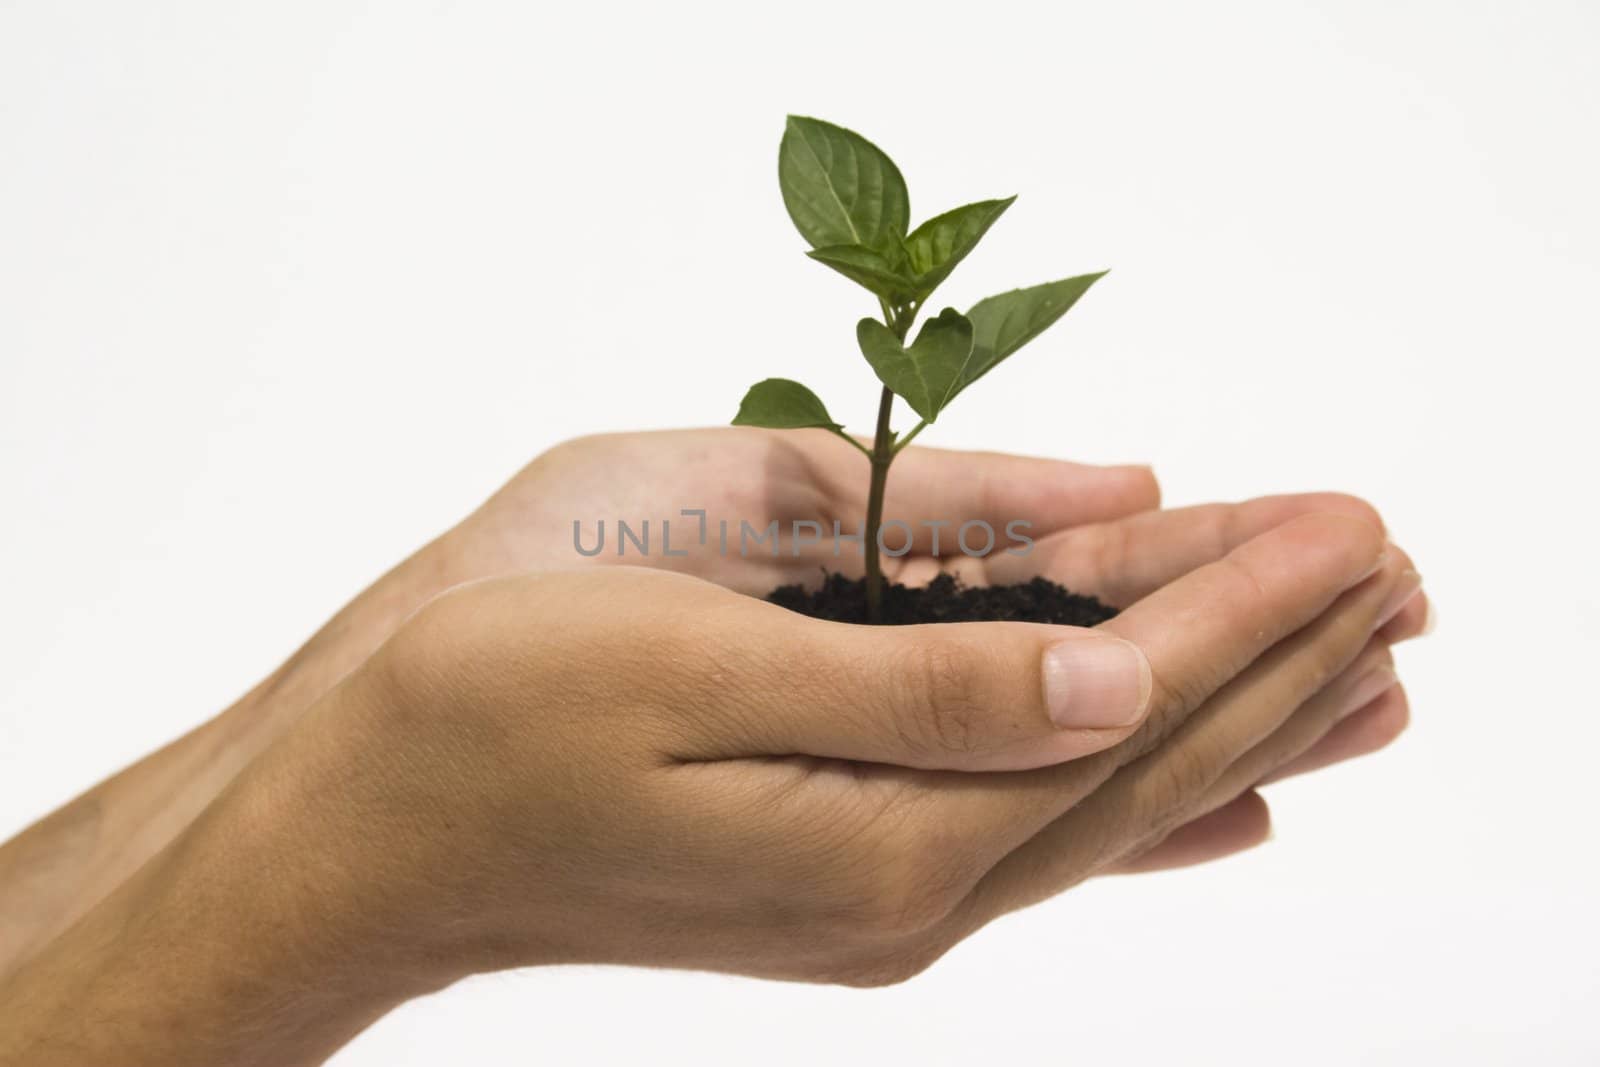 Hands holding young plant against white background